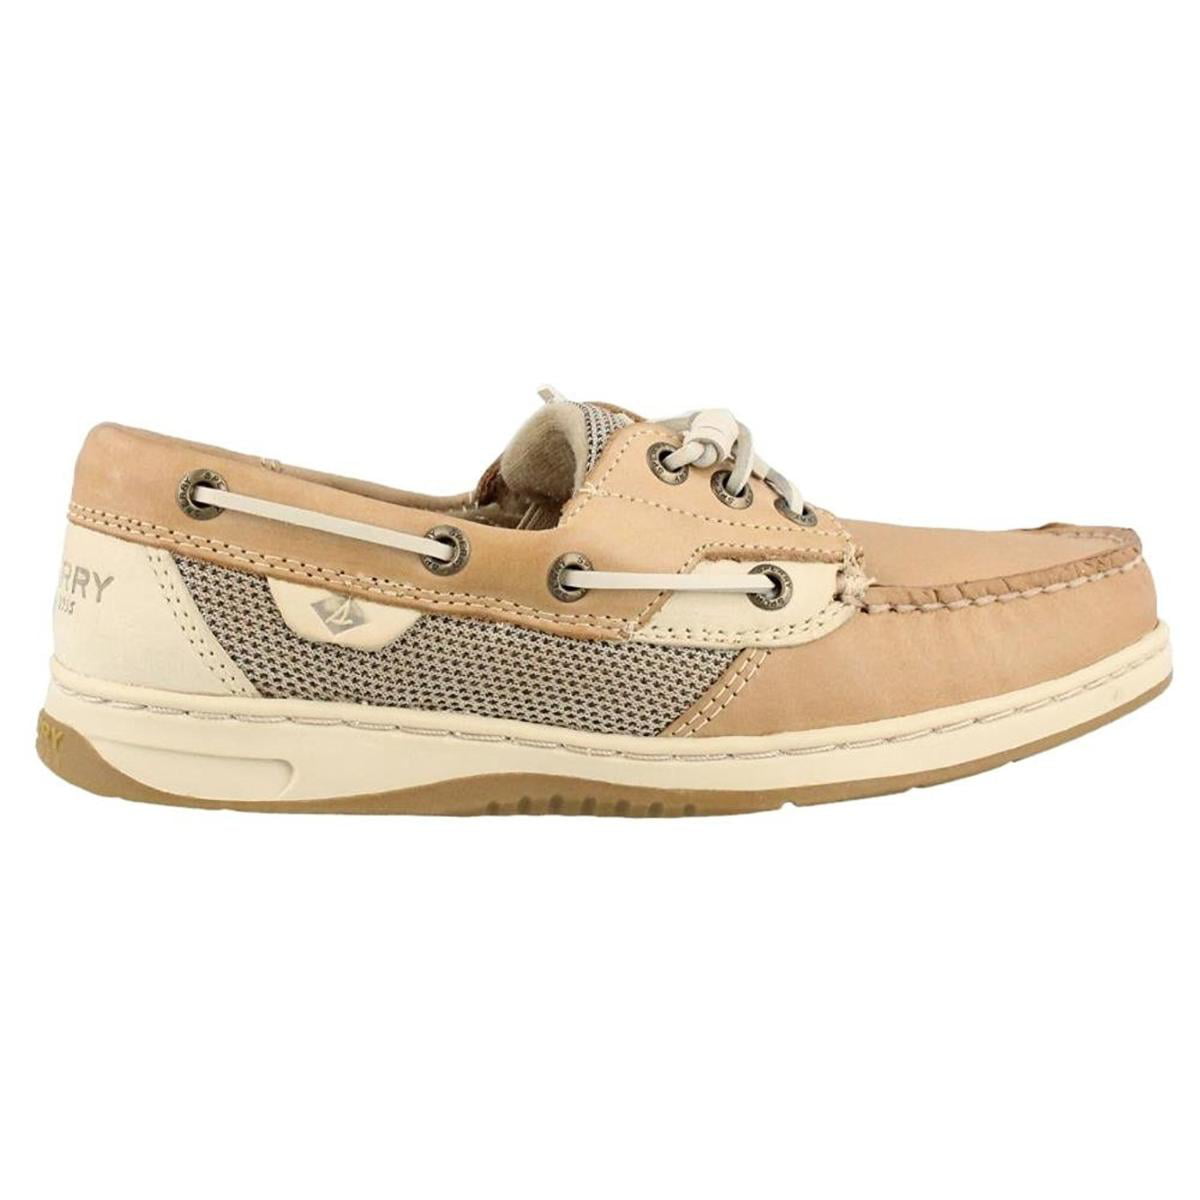 Sperry - Sperry Top-Sider Rosefish Womens Linen/Oat Boat Shoes ...